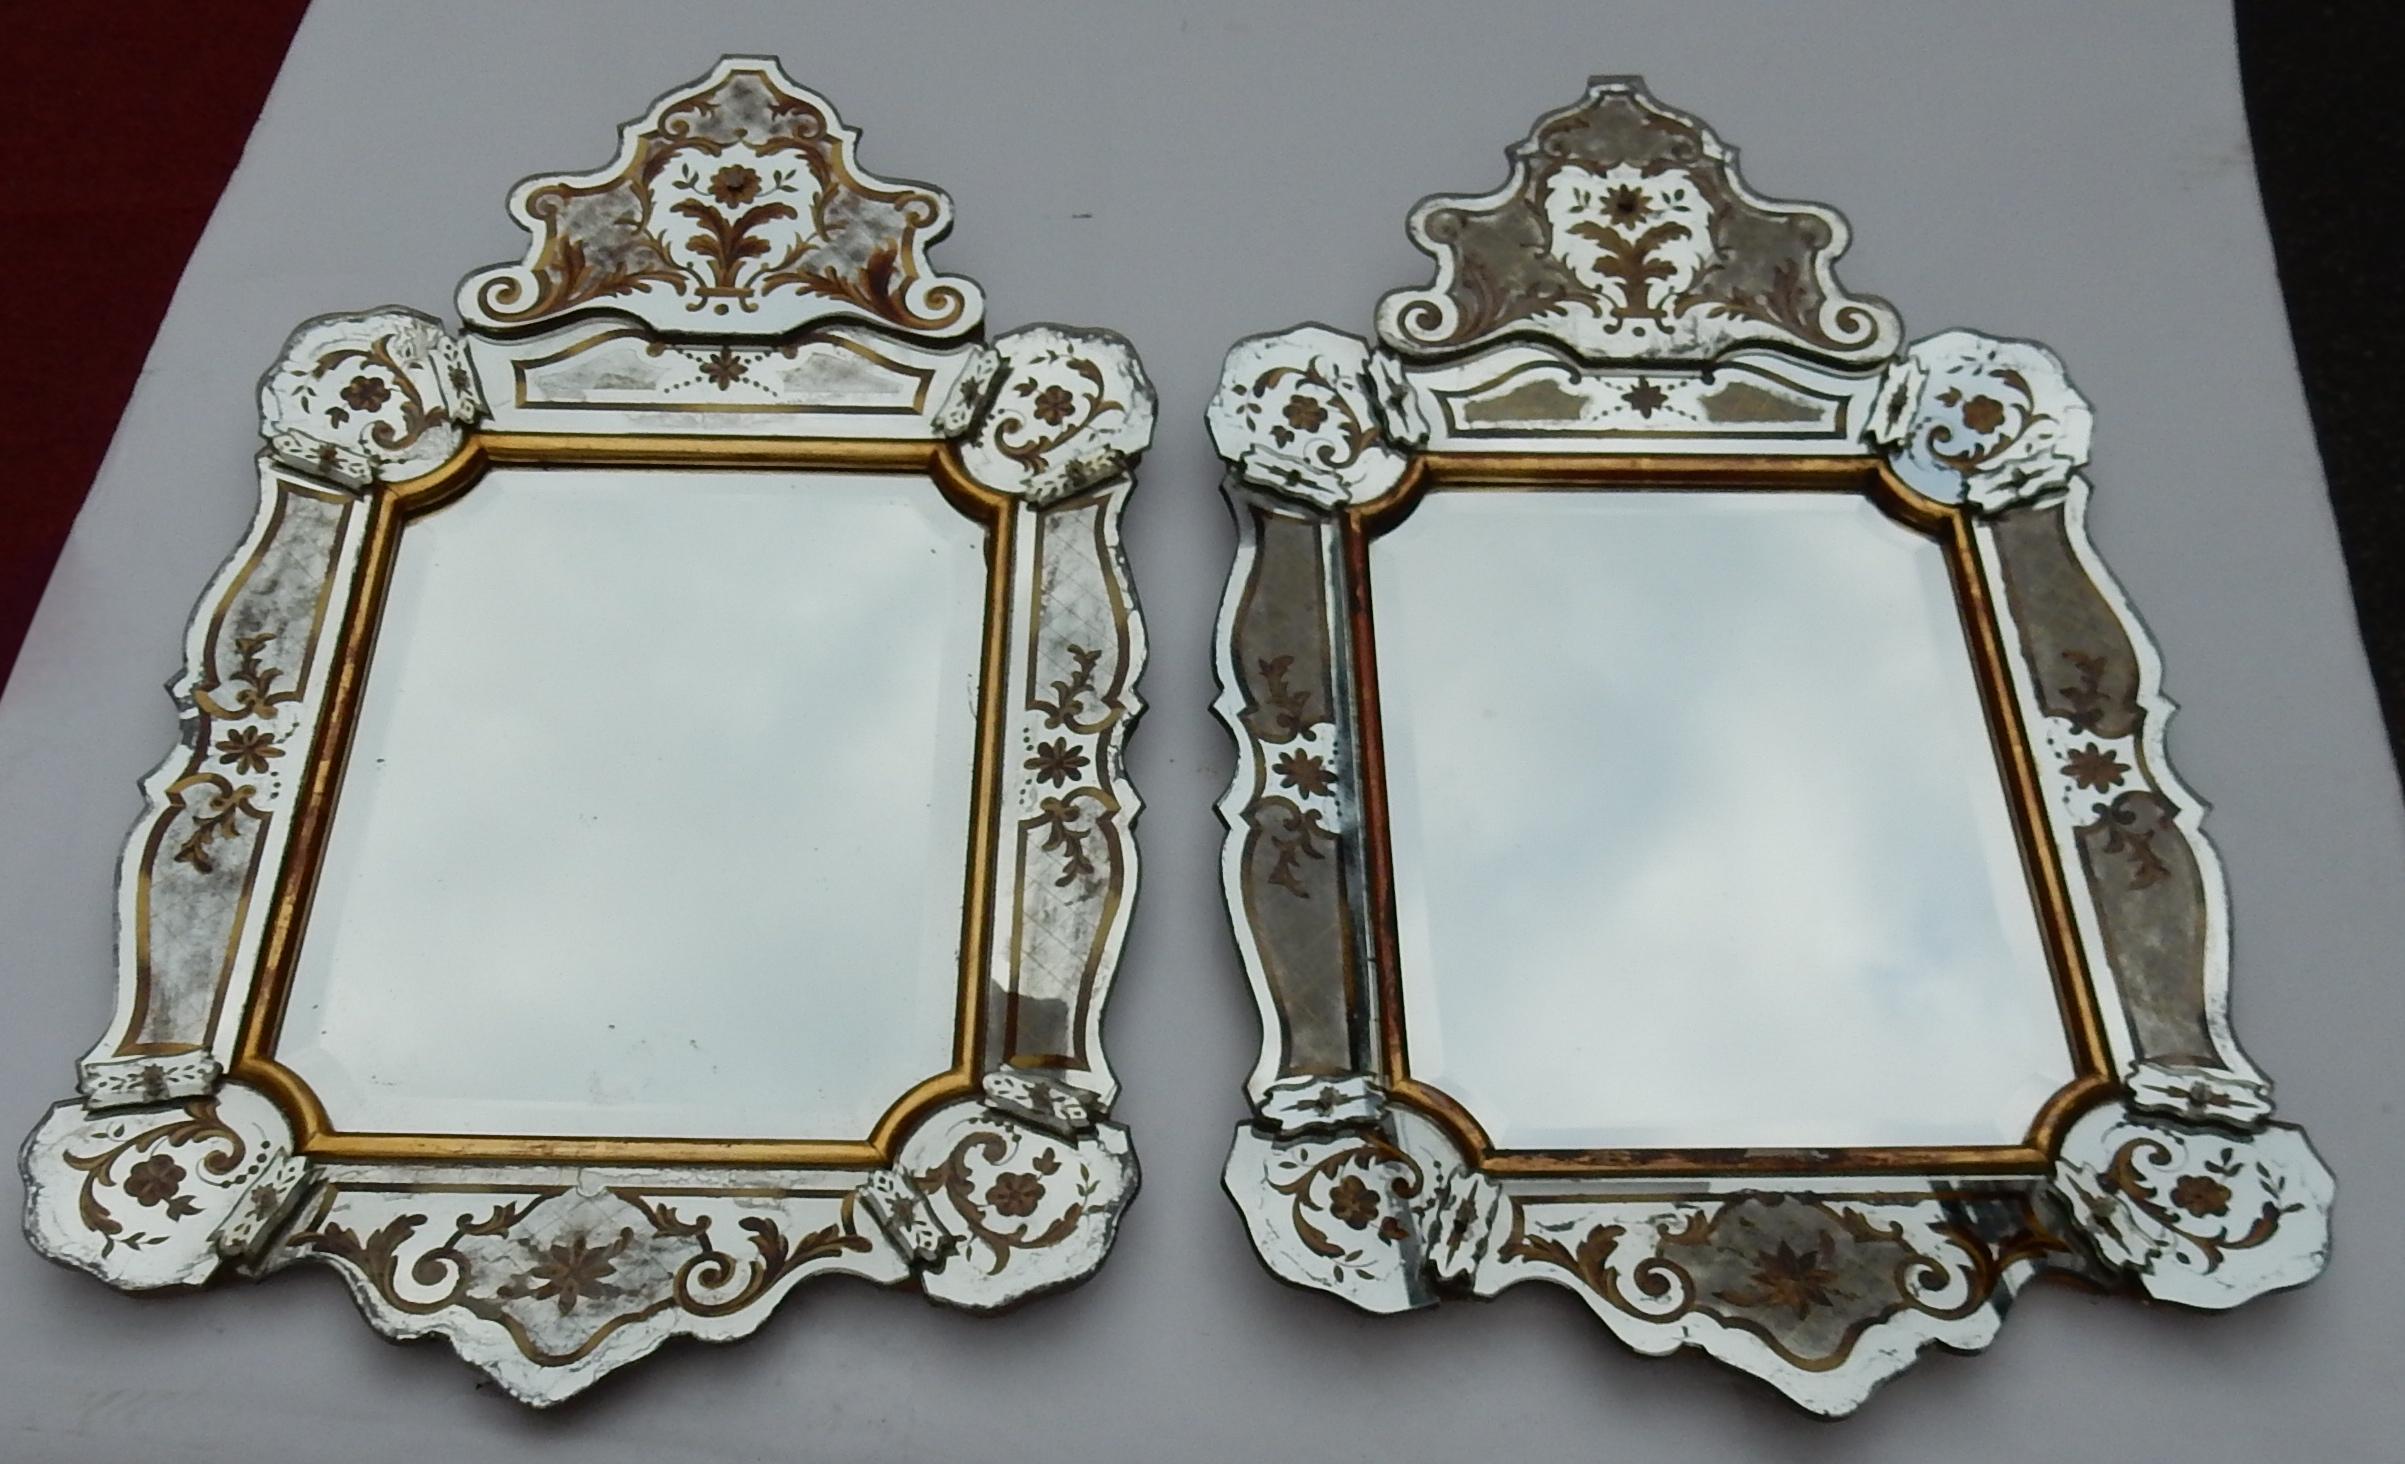 Églomised pair of mirrors circa 1950 center mirror beveled.
Framed by a golden wooden baguette, condition of use.